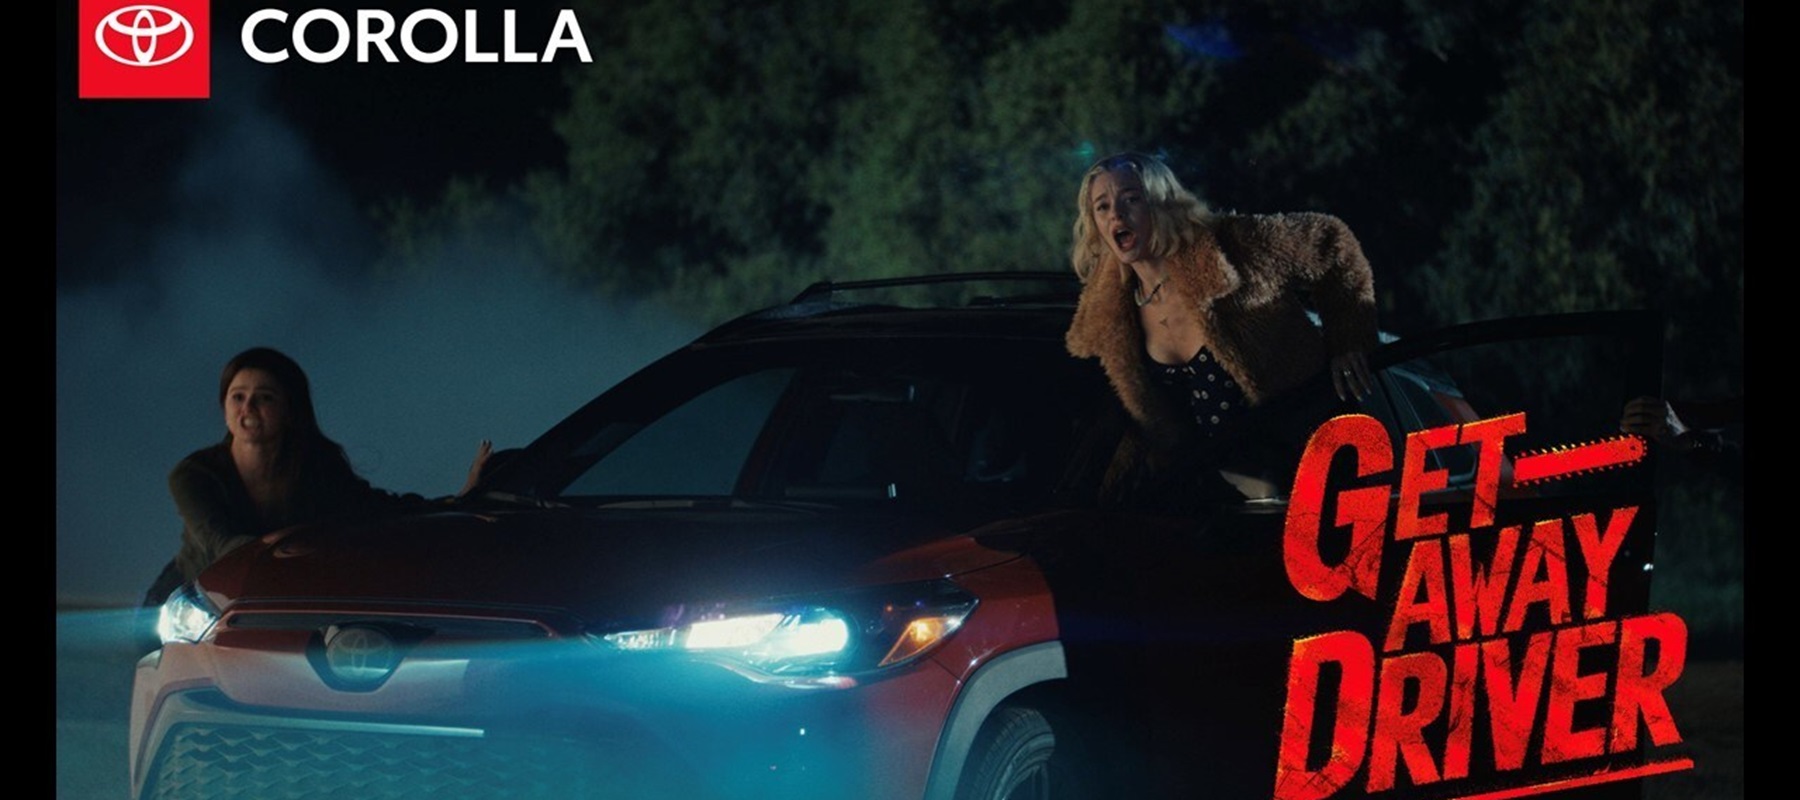 Toyota teams up with comic-actor King Bach in ad campaign to celebrate the Corolla Hybrid